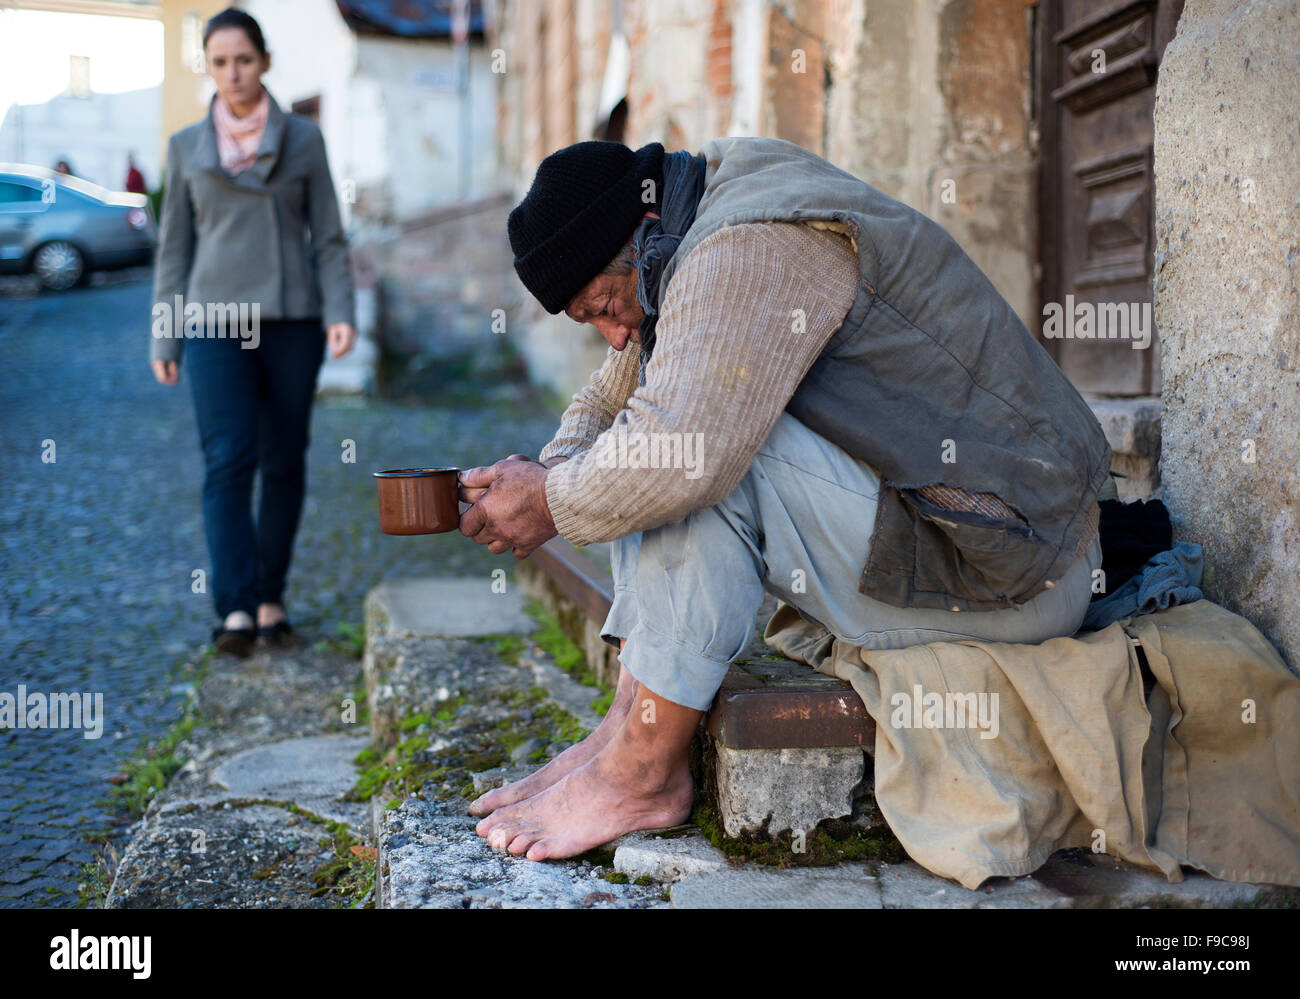 homeless man in the street Stock Photo